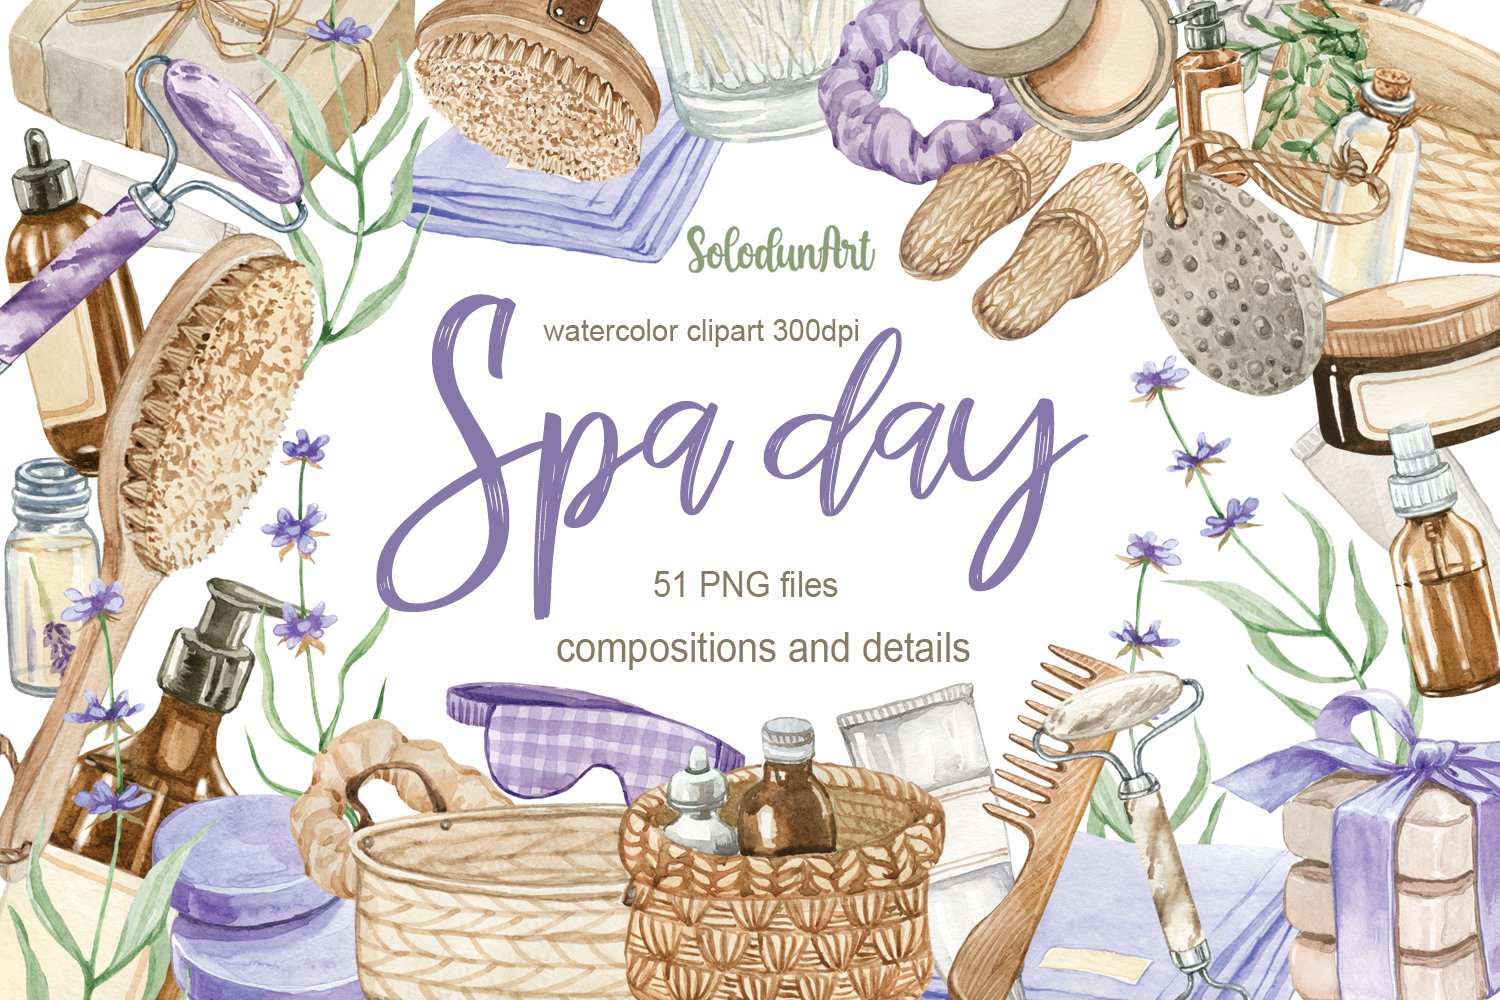 Cover image of Watercolor Spa clipart.